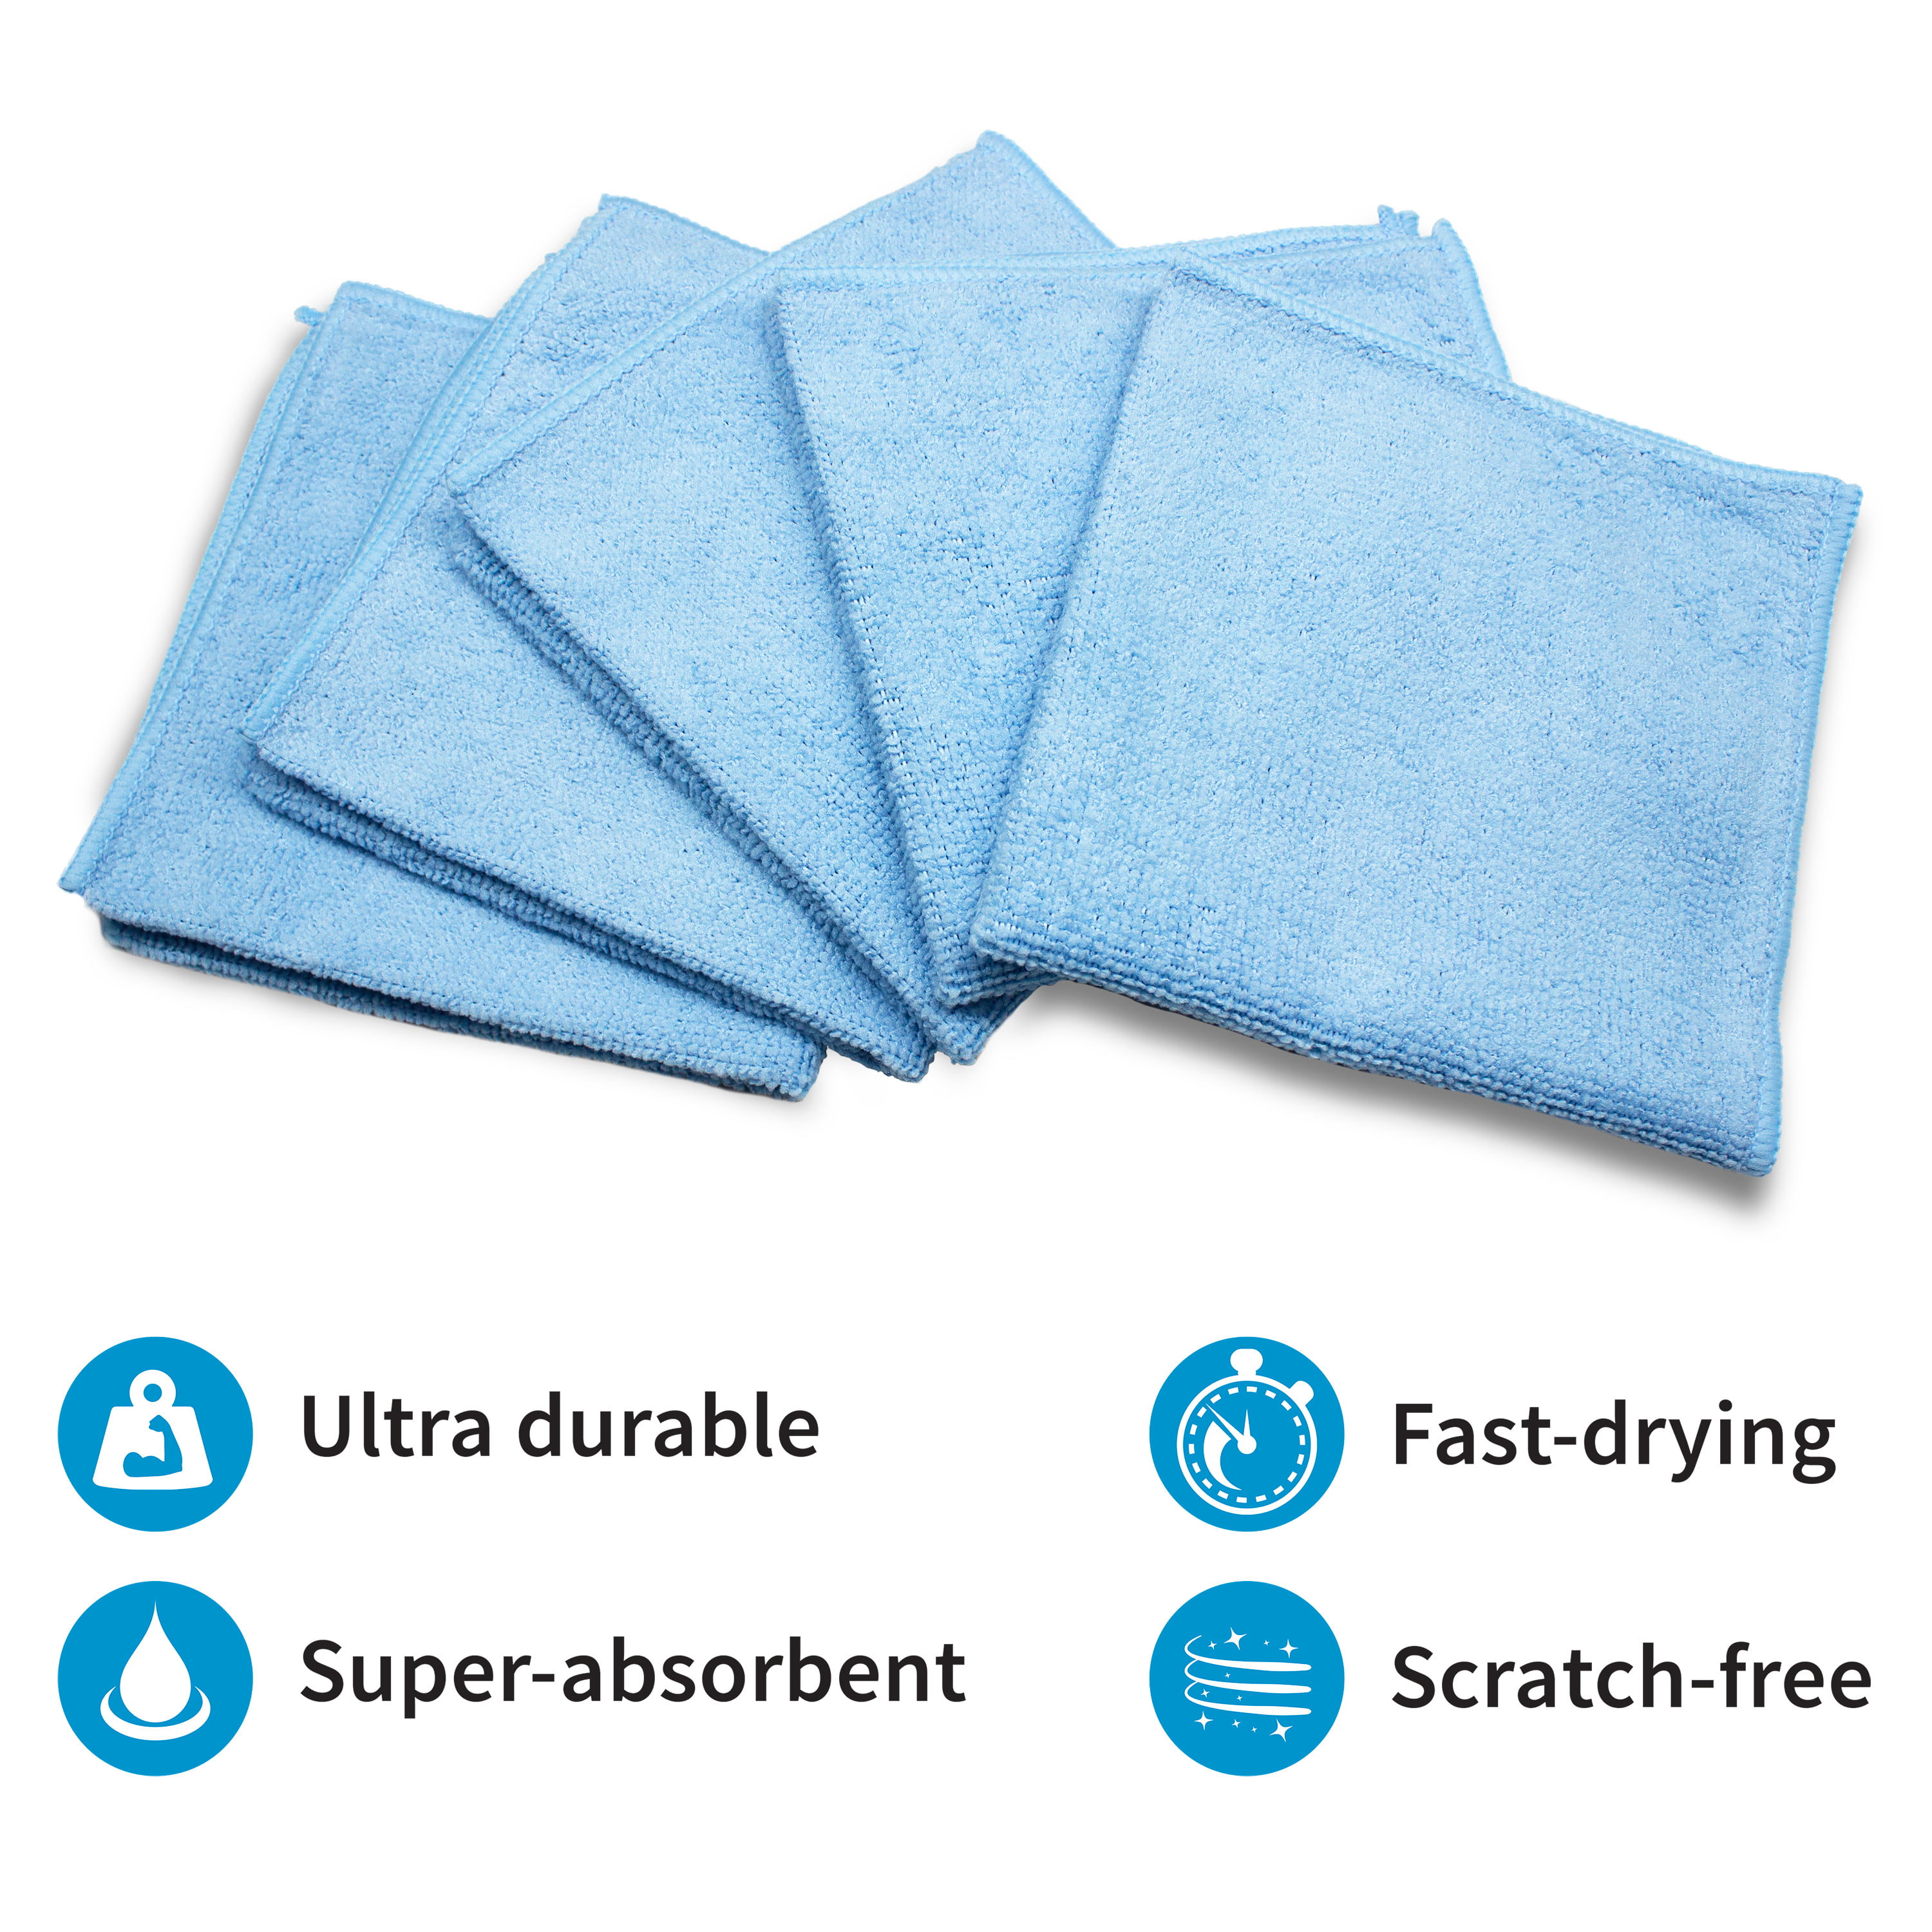 S&T Inc. 524601 Microfiber Cleaning Cloths, Reusable and Lint-Free Towels for 50